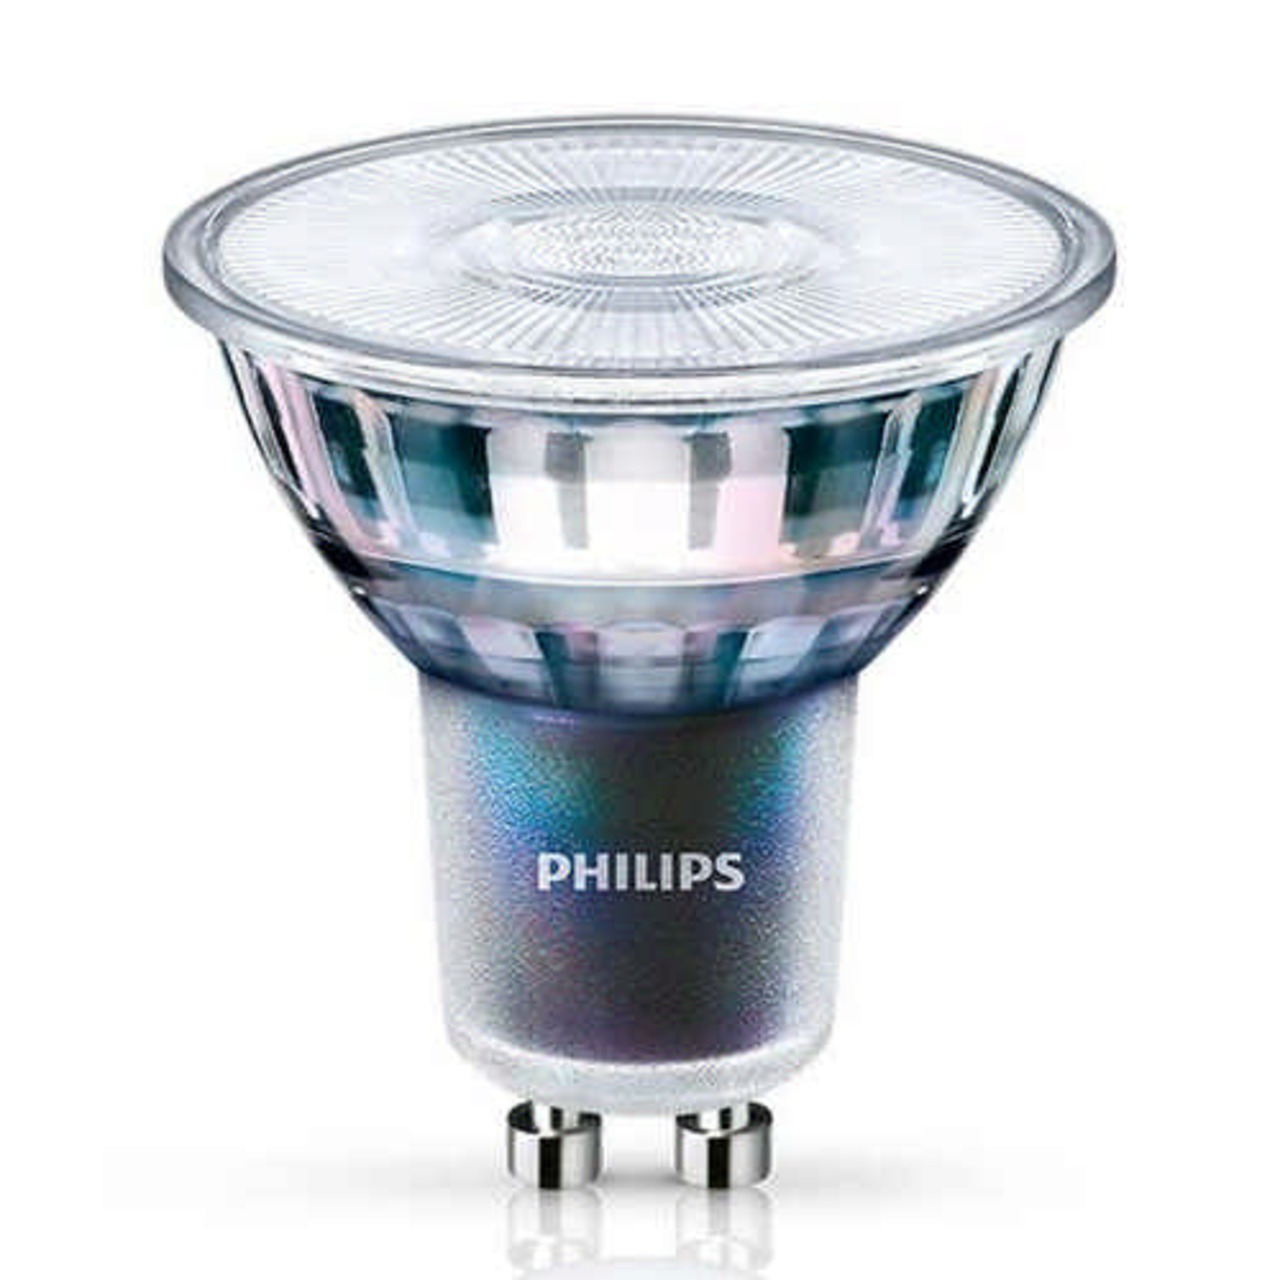 Philips MASTER ExpertColor 3-9-W-GU10-LED-Lampe- 280 lm- 97 Ra- 36- 3000K- warmweiss- dimmbar unter Beleuchtung